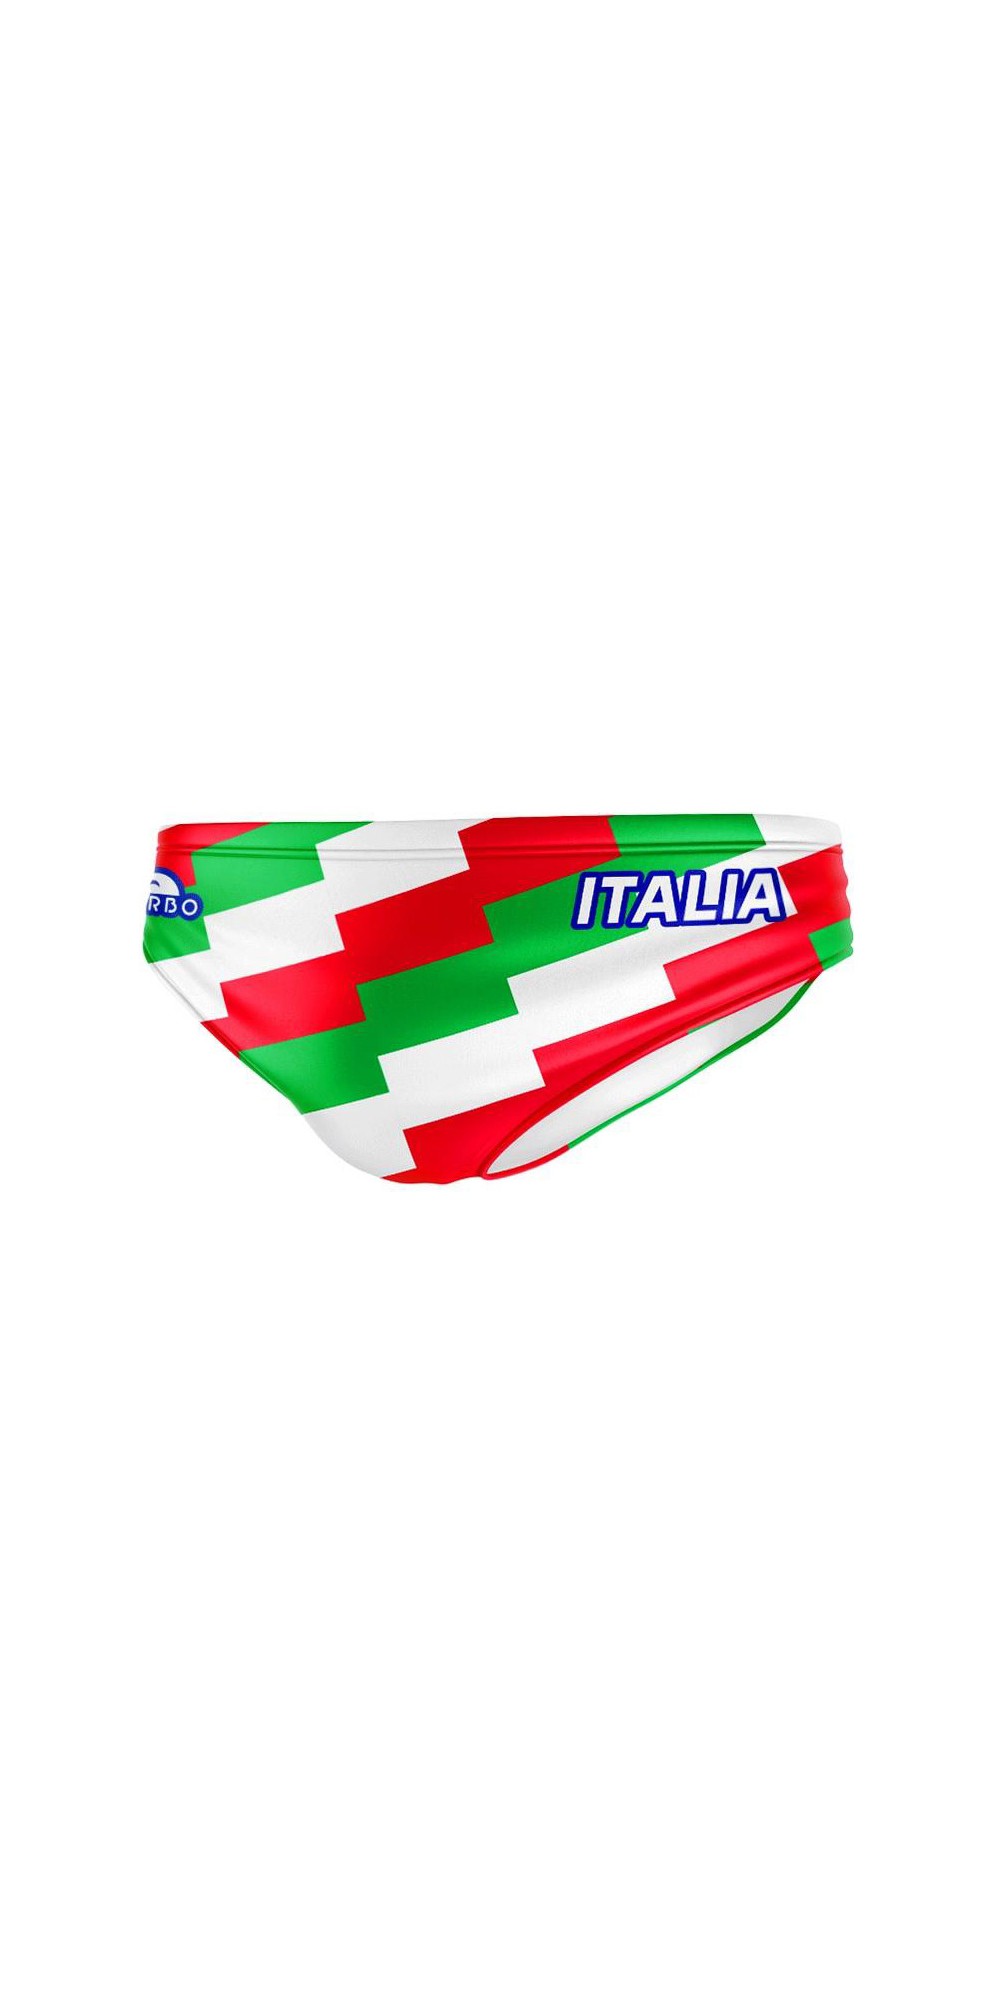 Italy Country (3 Semaines)